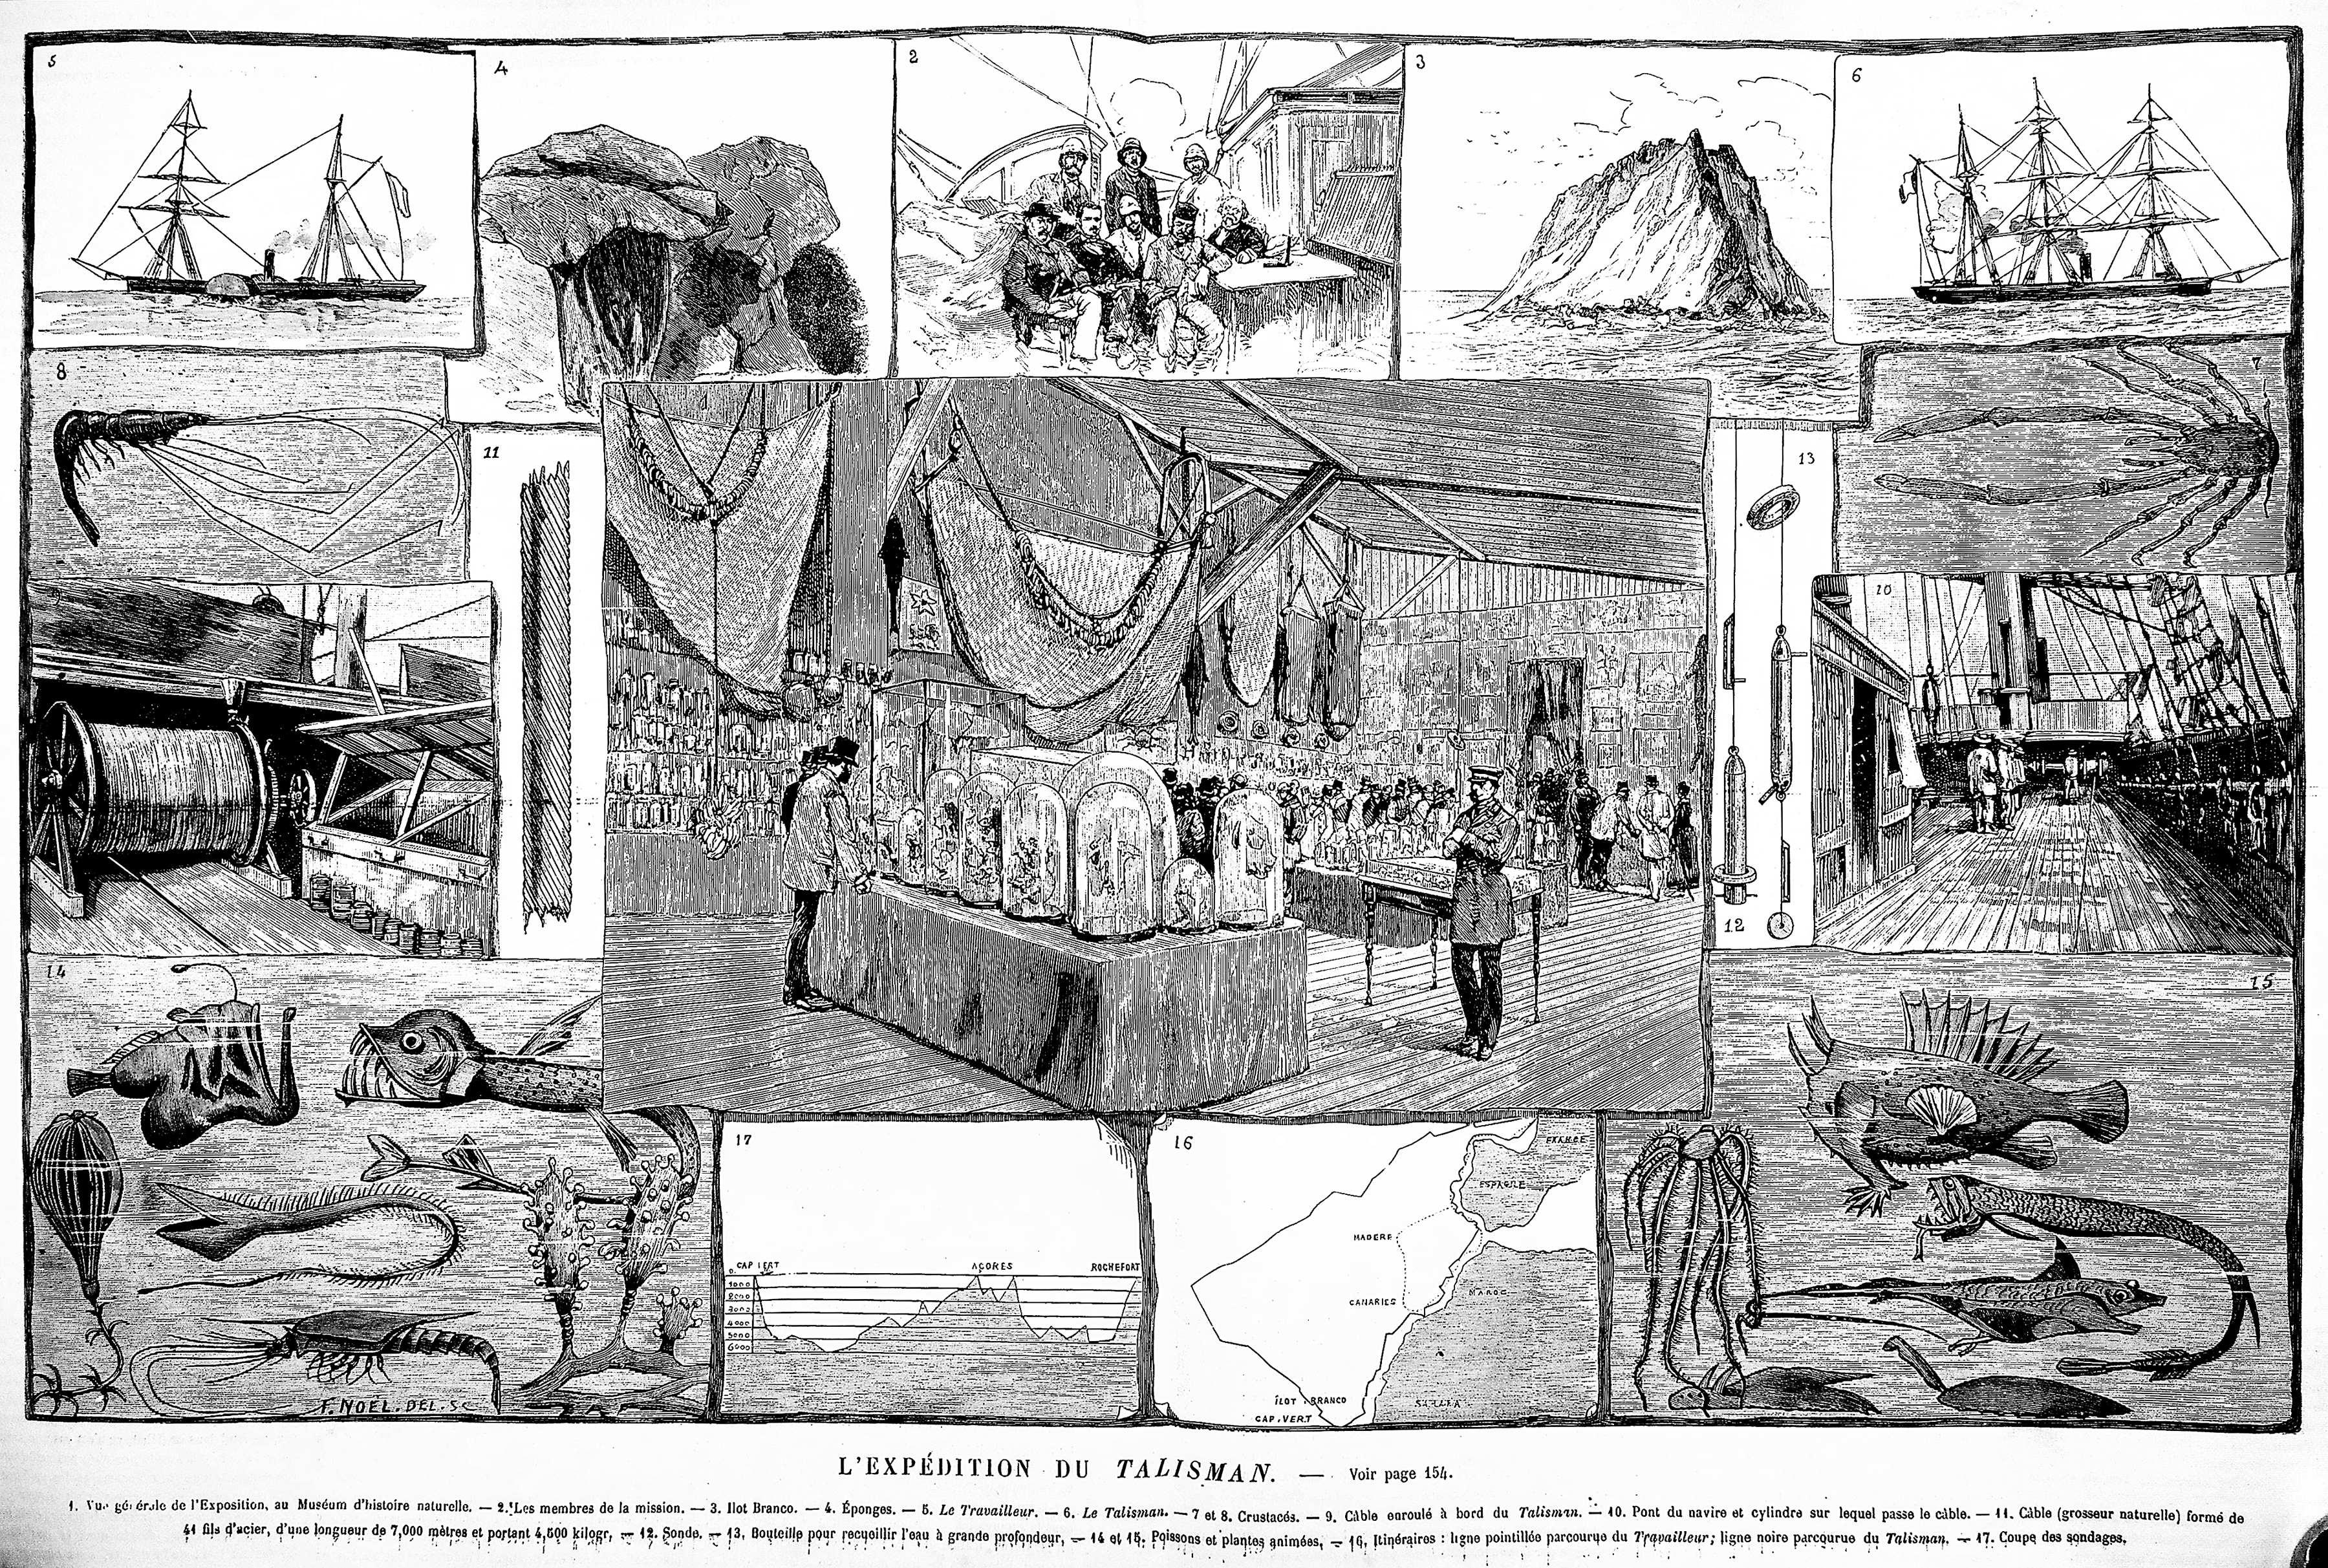 From an article in L'Univers Illustré on the expedition exposition